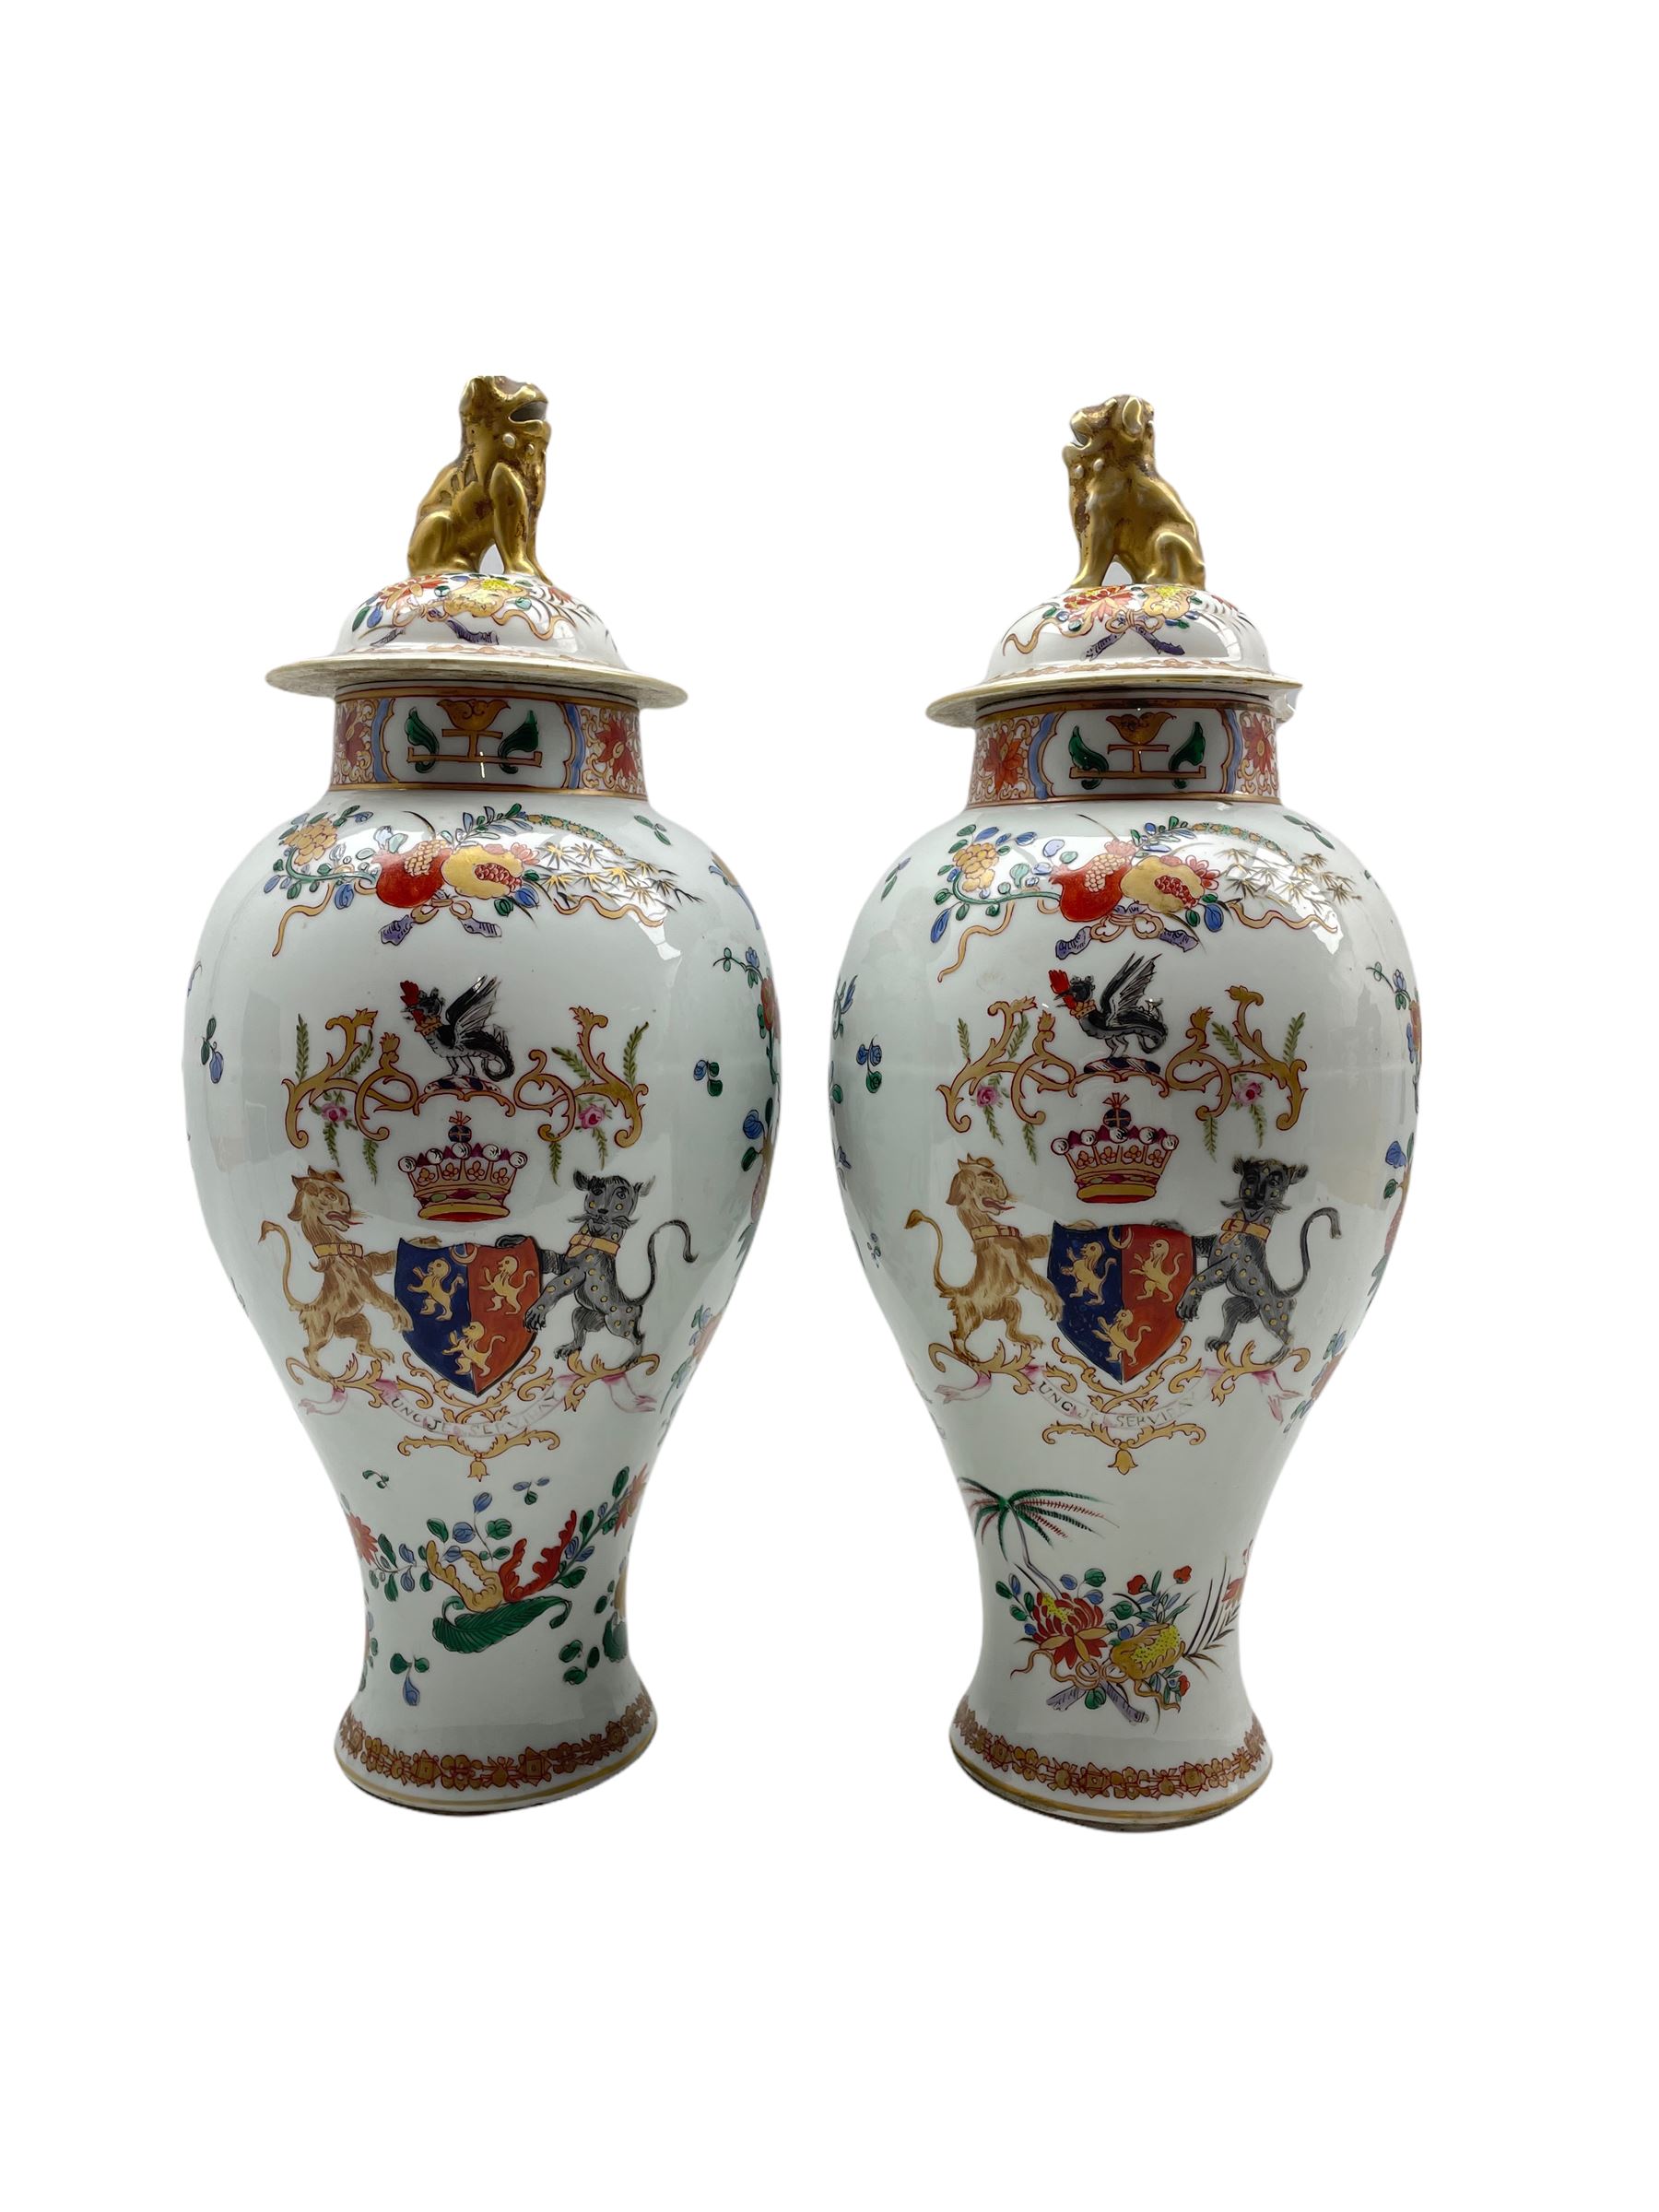 Pair of 19th century Samson of Paris armorial vases and covers decorated in the Chinese manner with